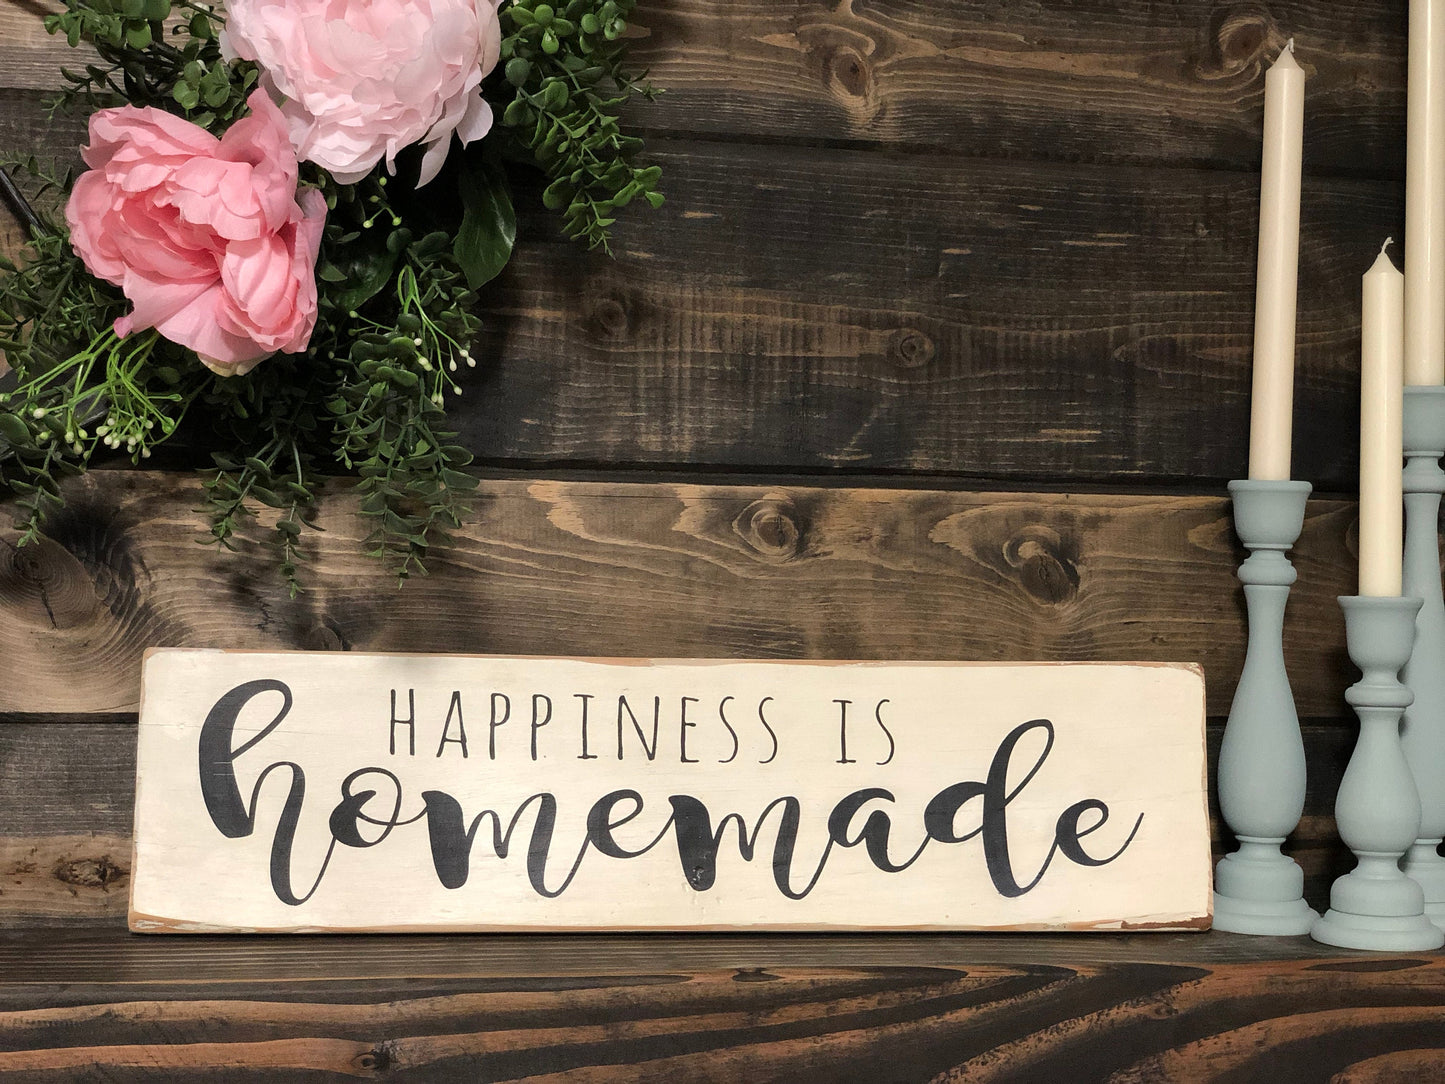 Happiness is Homemade - Happy Sign - Daily Reminders -